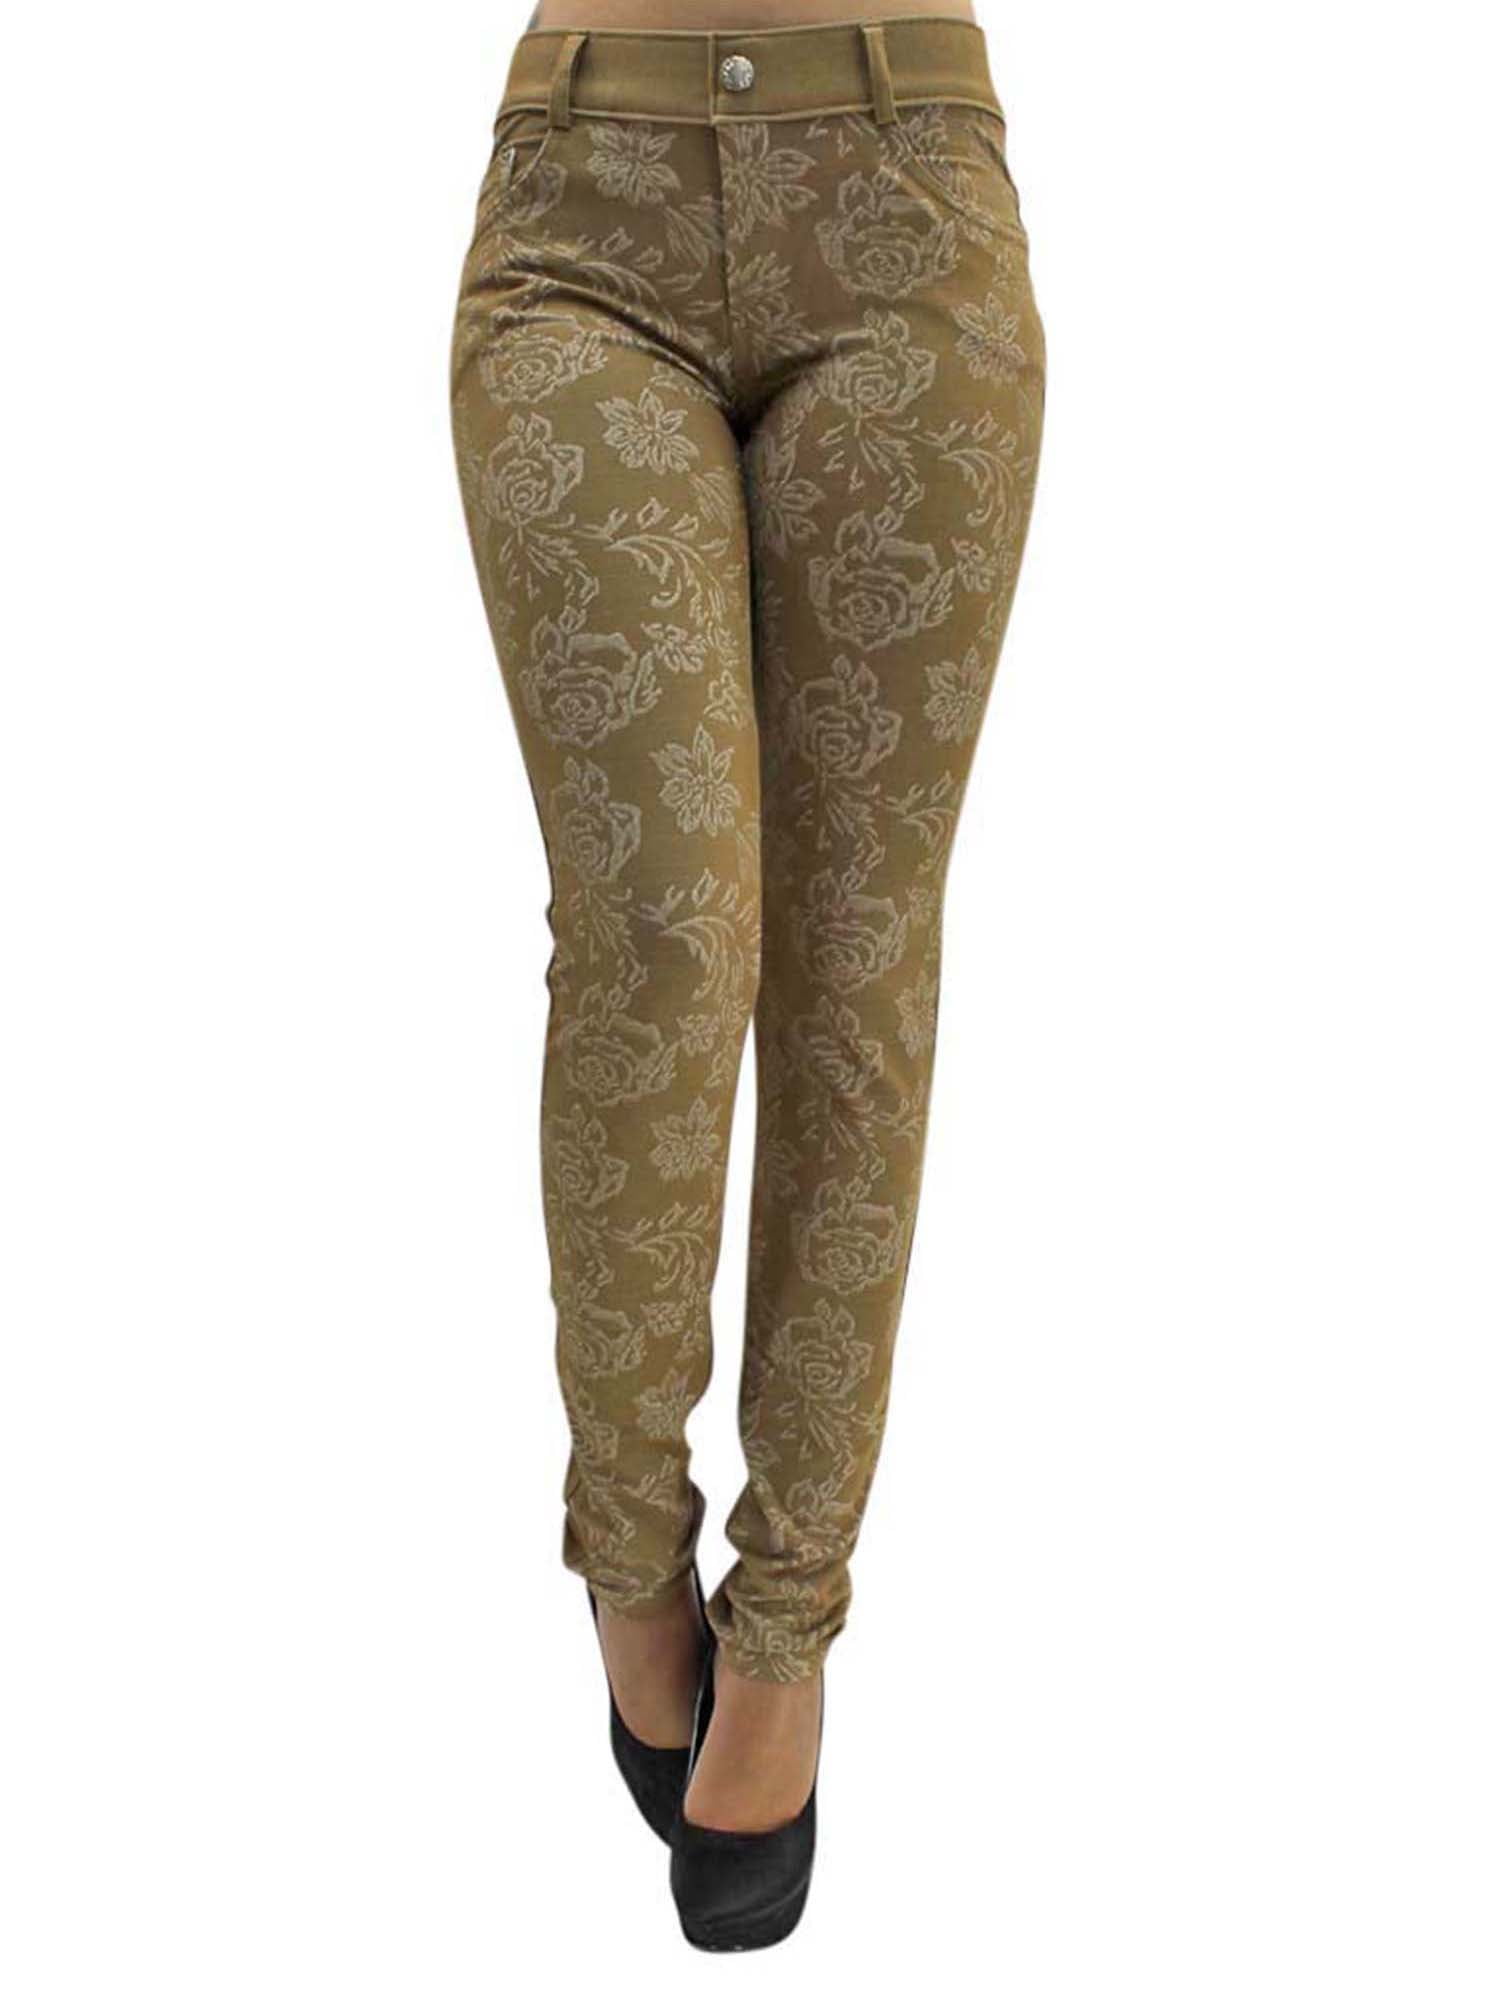 Khaki Floral Stretch Jeggings With Pockets Size Small/Medium